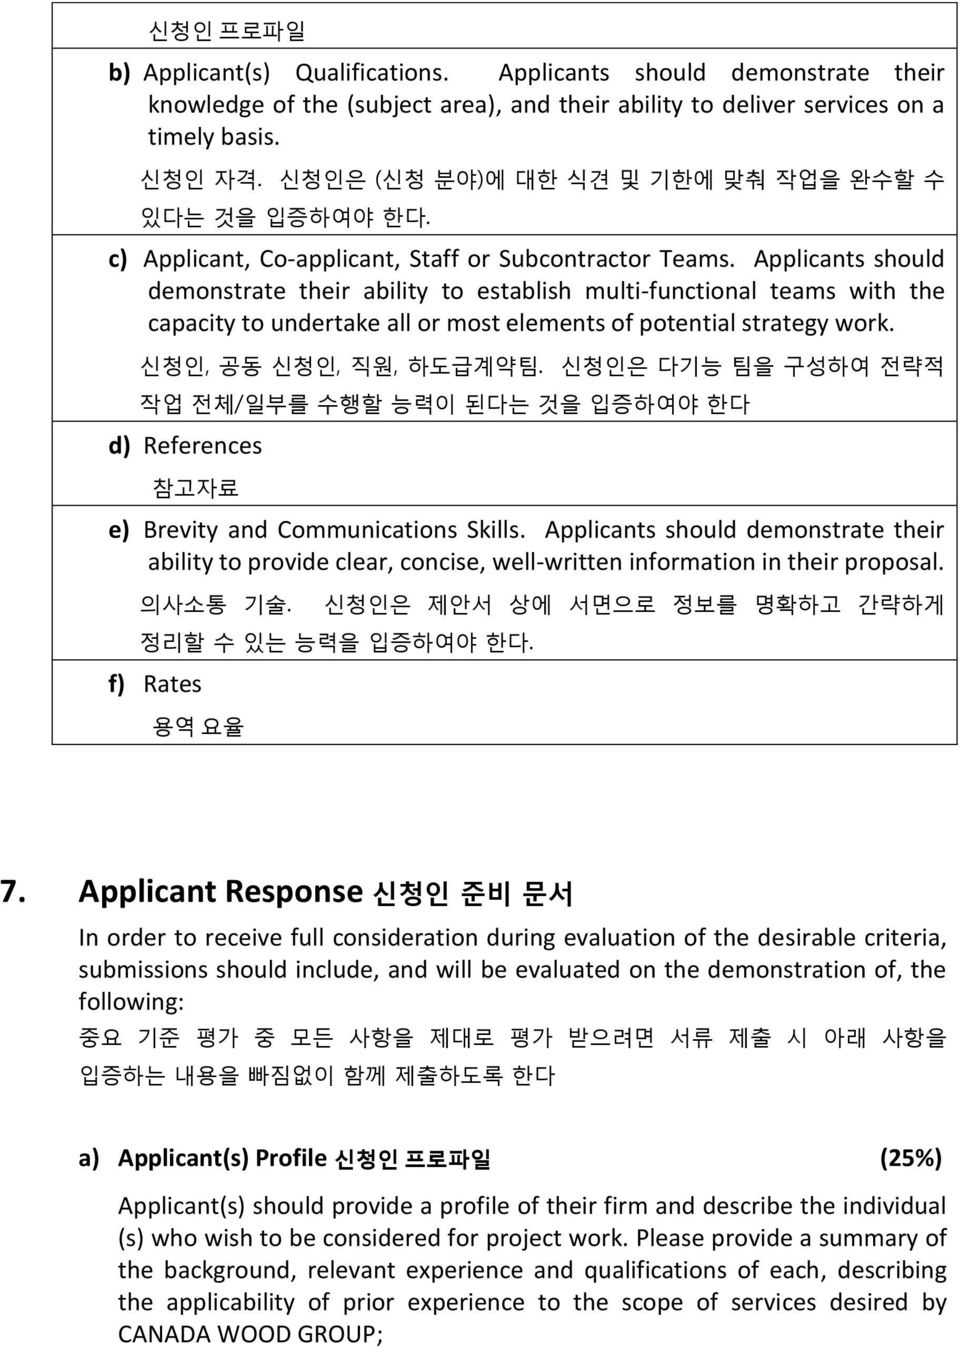 Applicants should demonstrate their ability to establish multi-functional teams with the capacity to undertake all or most elements of potential strategy work. 신청인, 공동 신청인, 직원, 하도급계약팀.